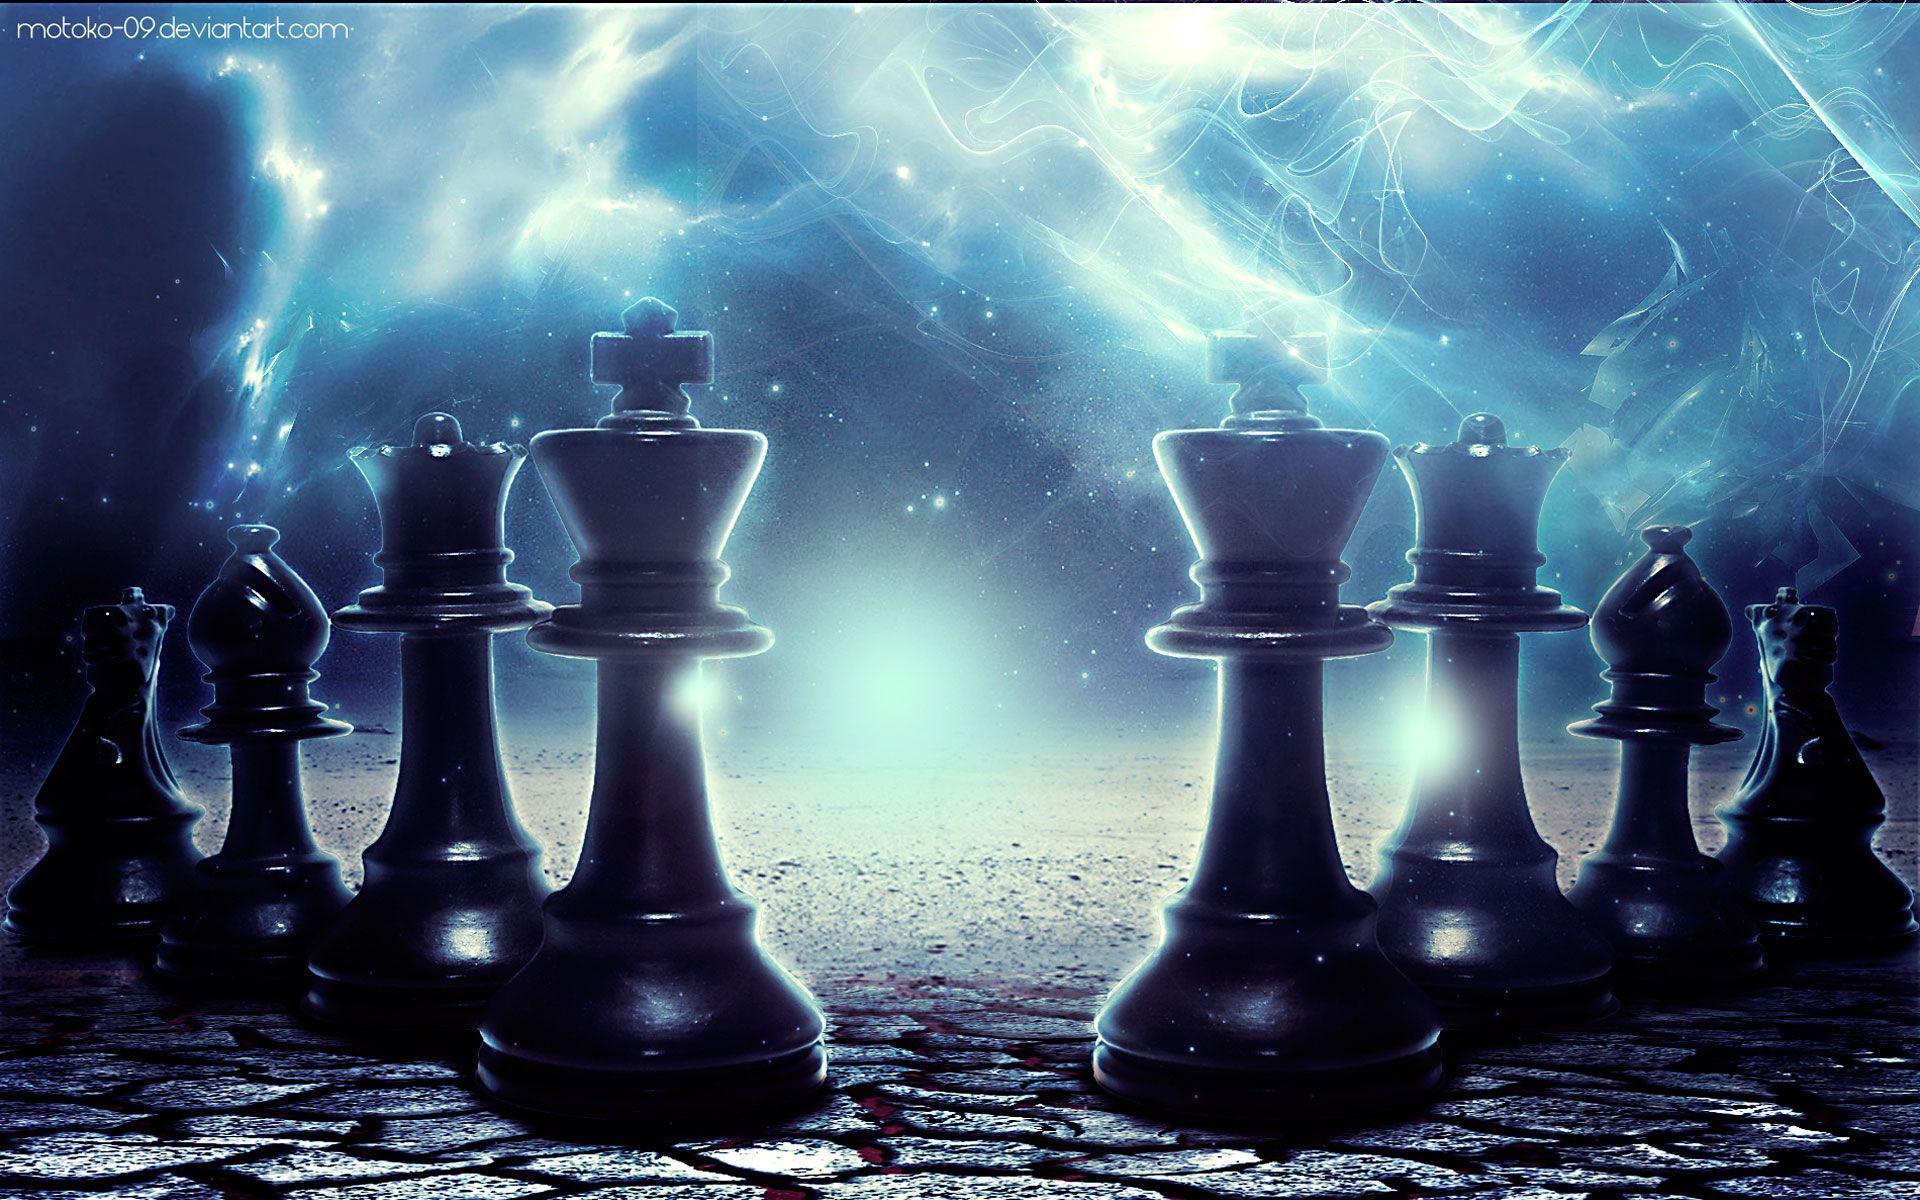 3Wallpapers for iPhone on X: iPhone Wallpaper Chess - Chess - Download in  HD ==>   / X